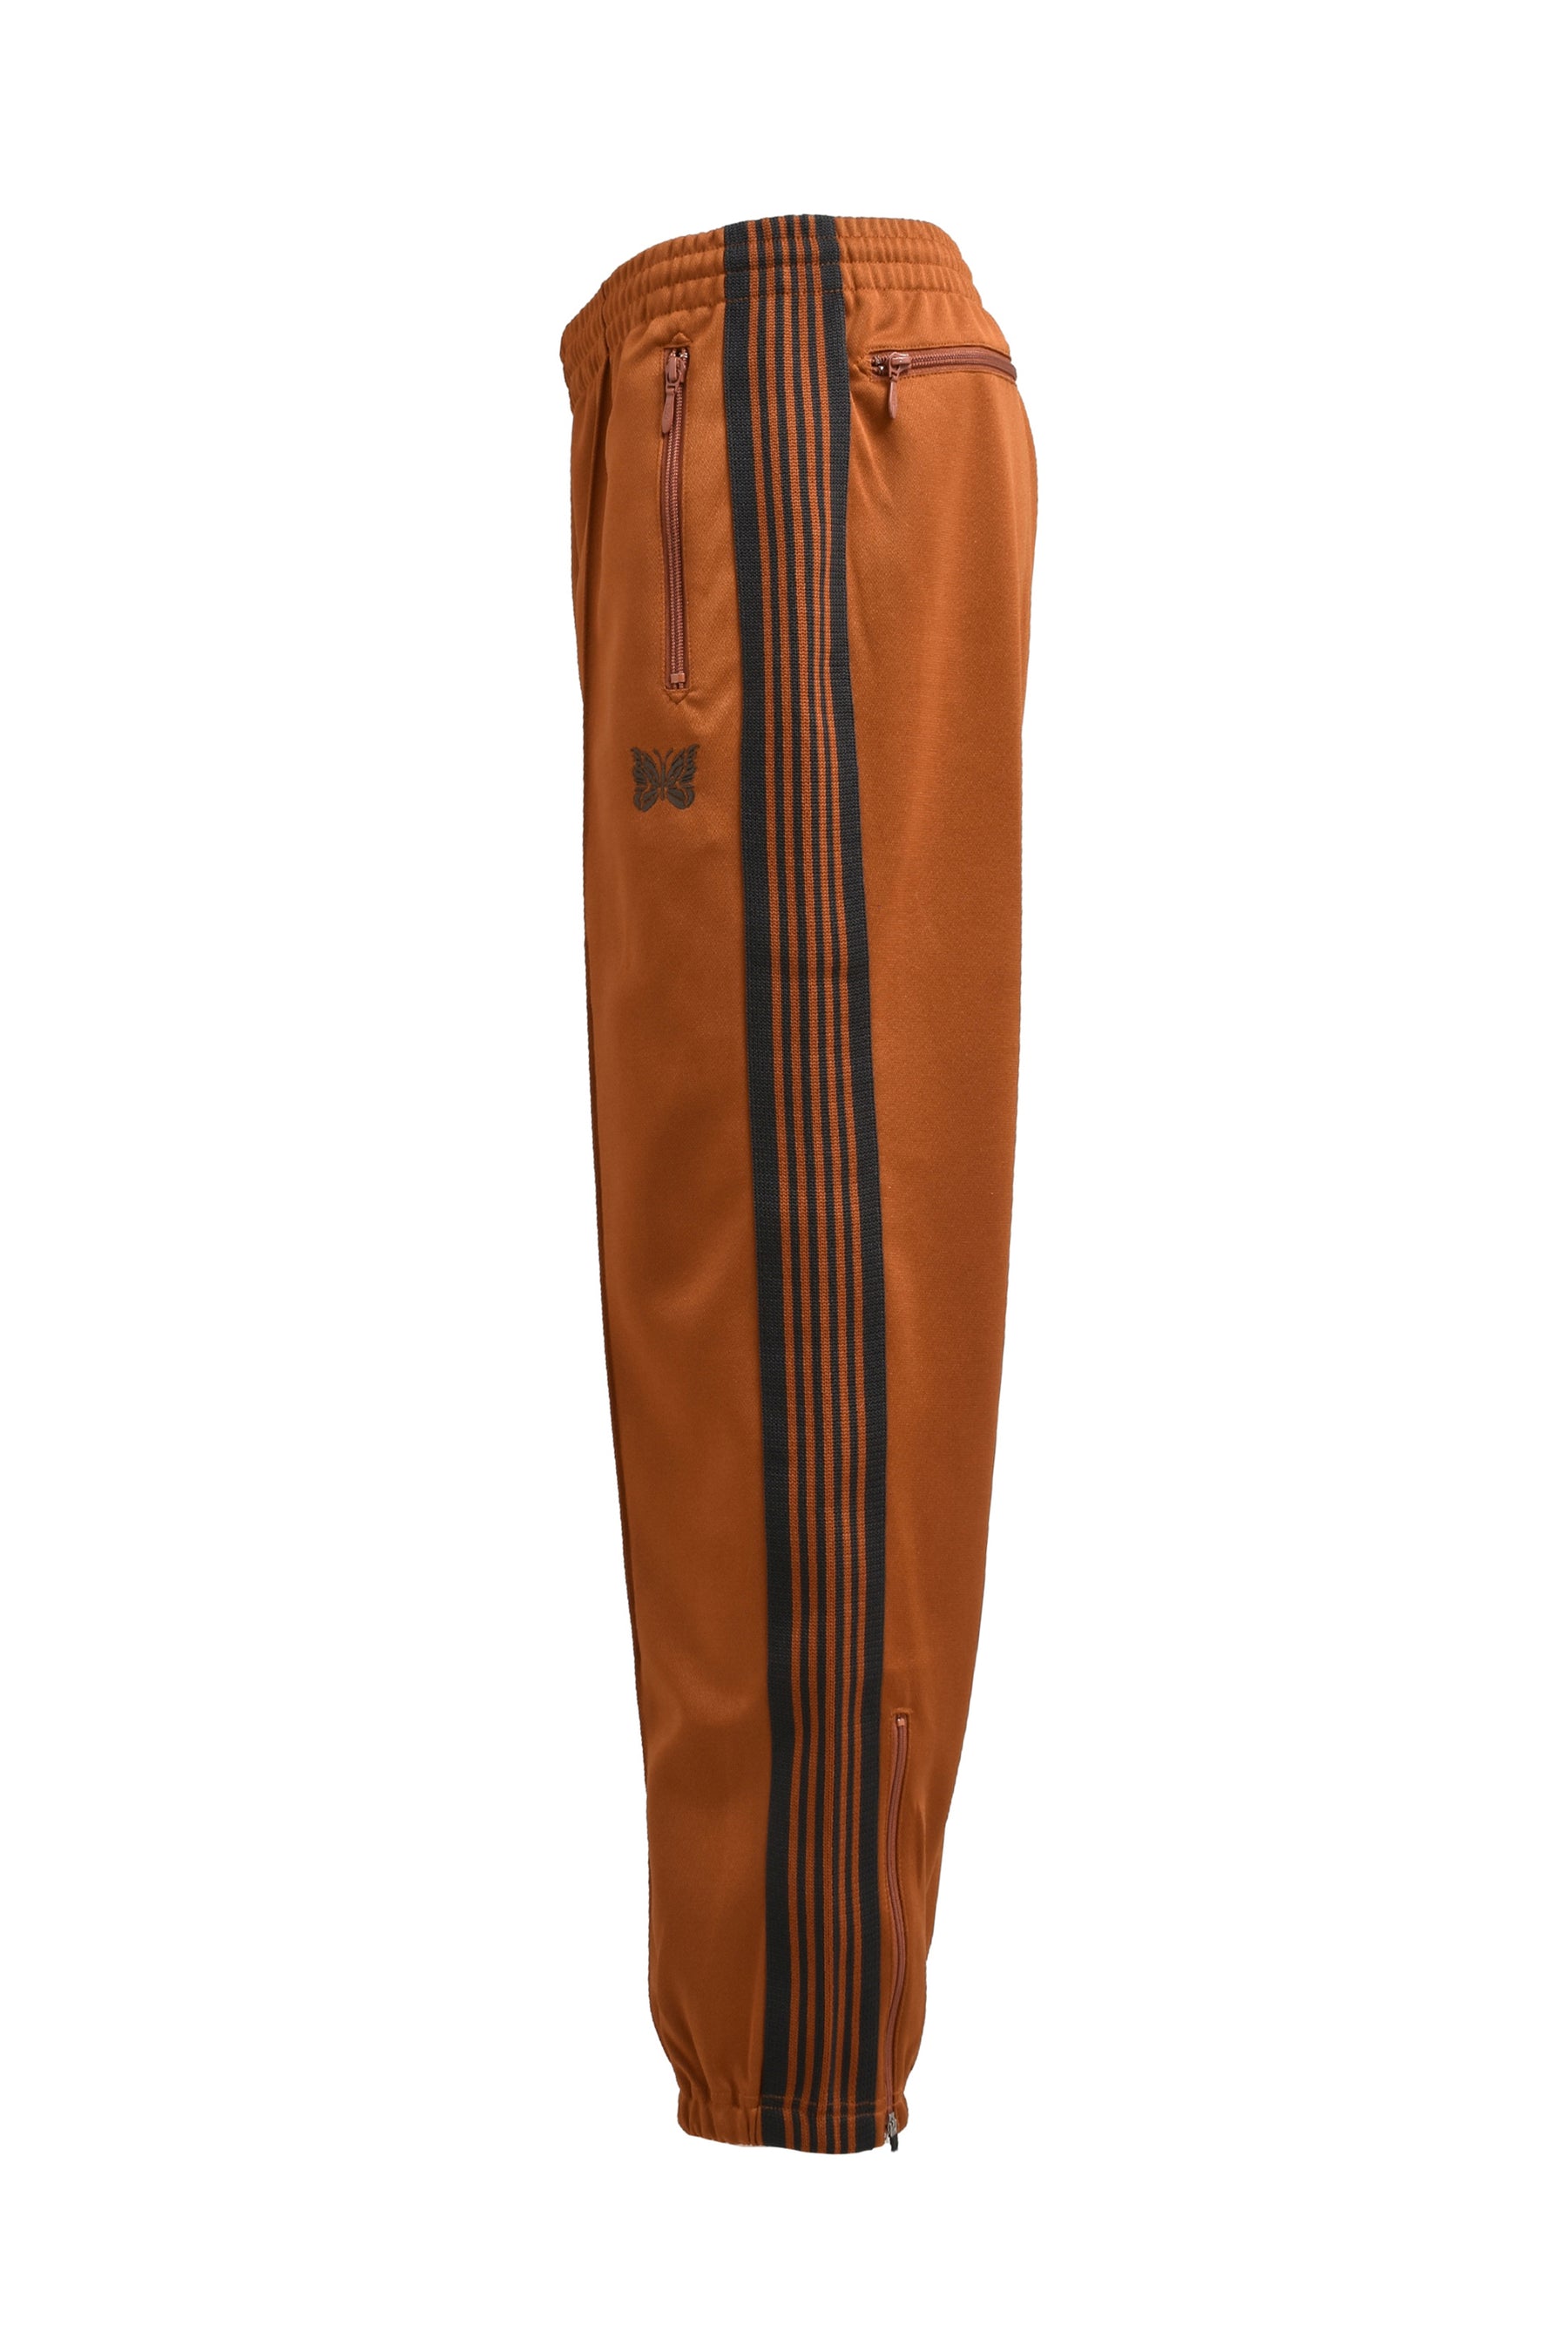 ZIPPED TRACK PANT - POLY SMOOTH / RUST